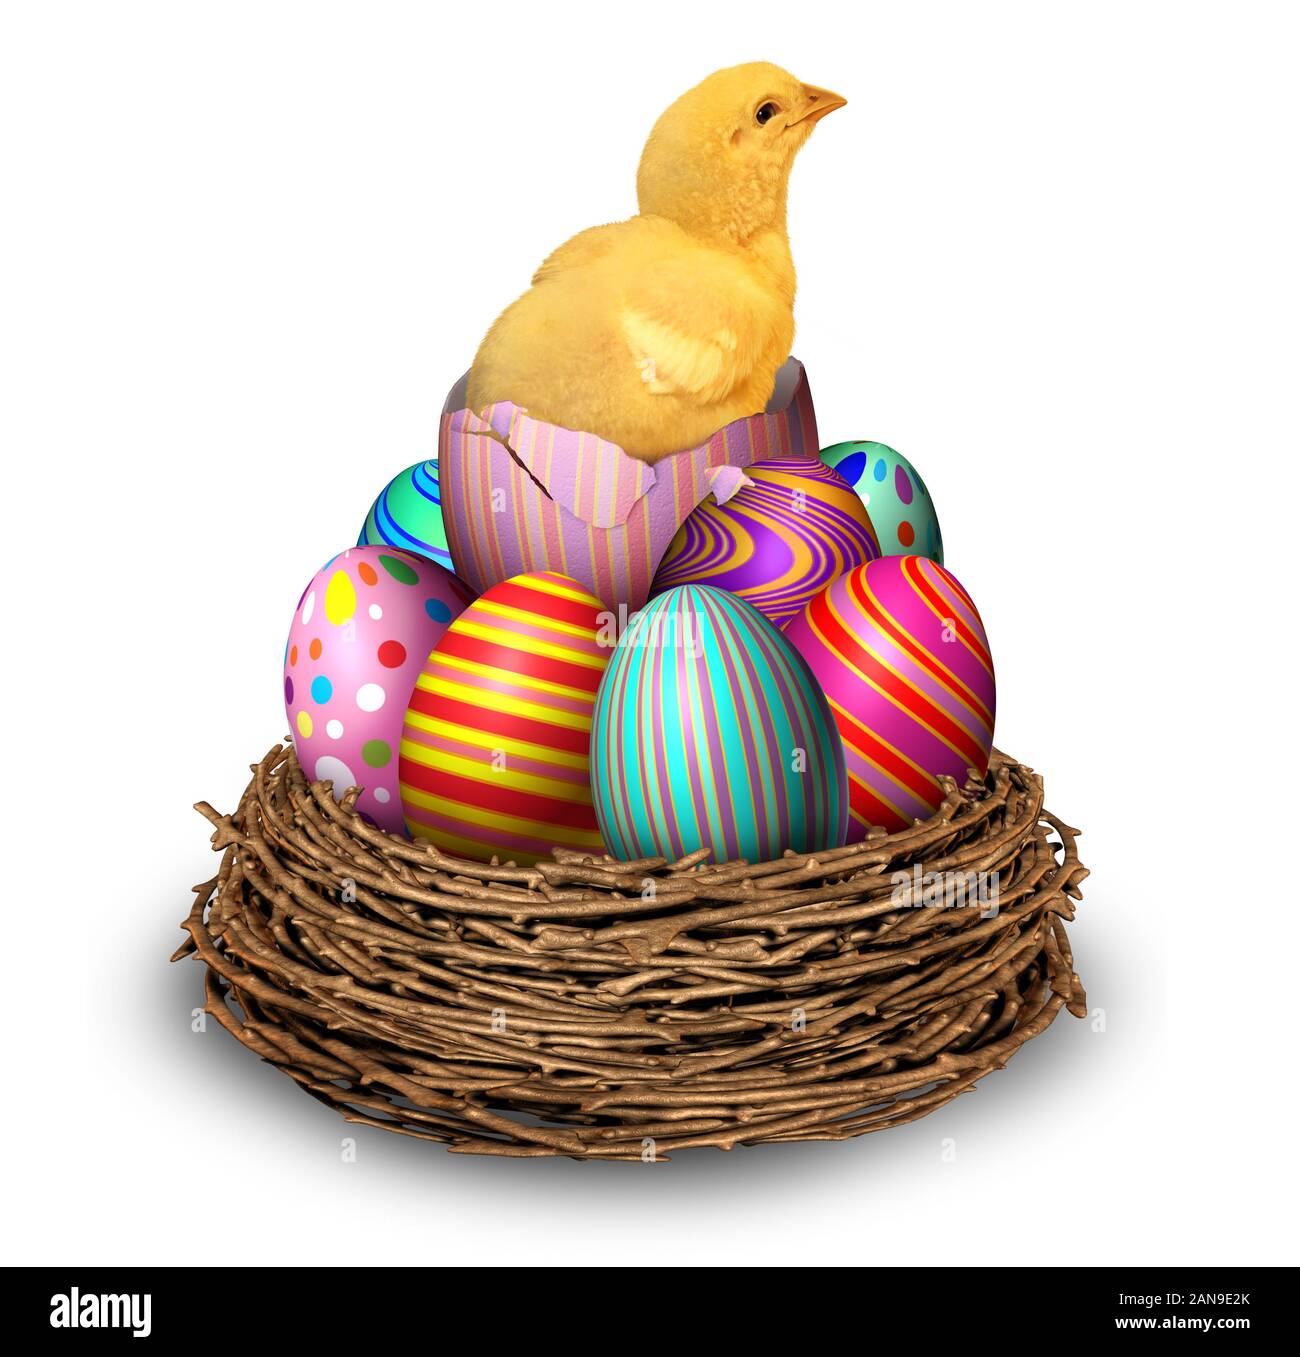 Easter eggs hatchling chick in a nest as a spring holiday symbol for celebration of a religious and traditional cultural event and a decorated egg. Stock Photo